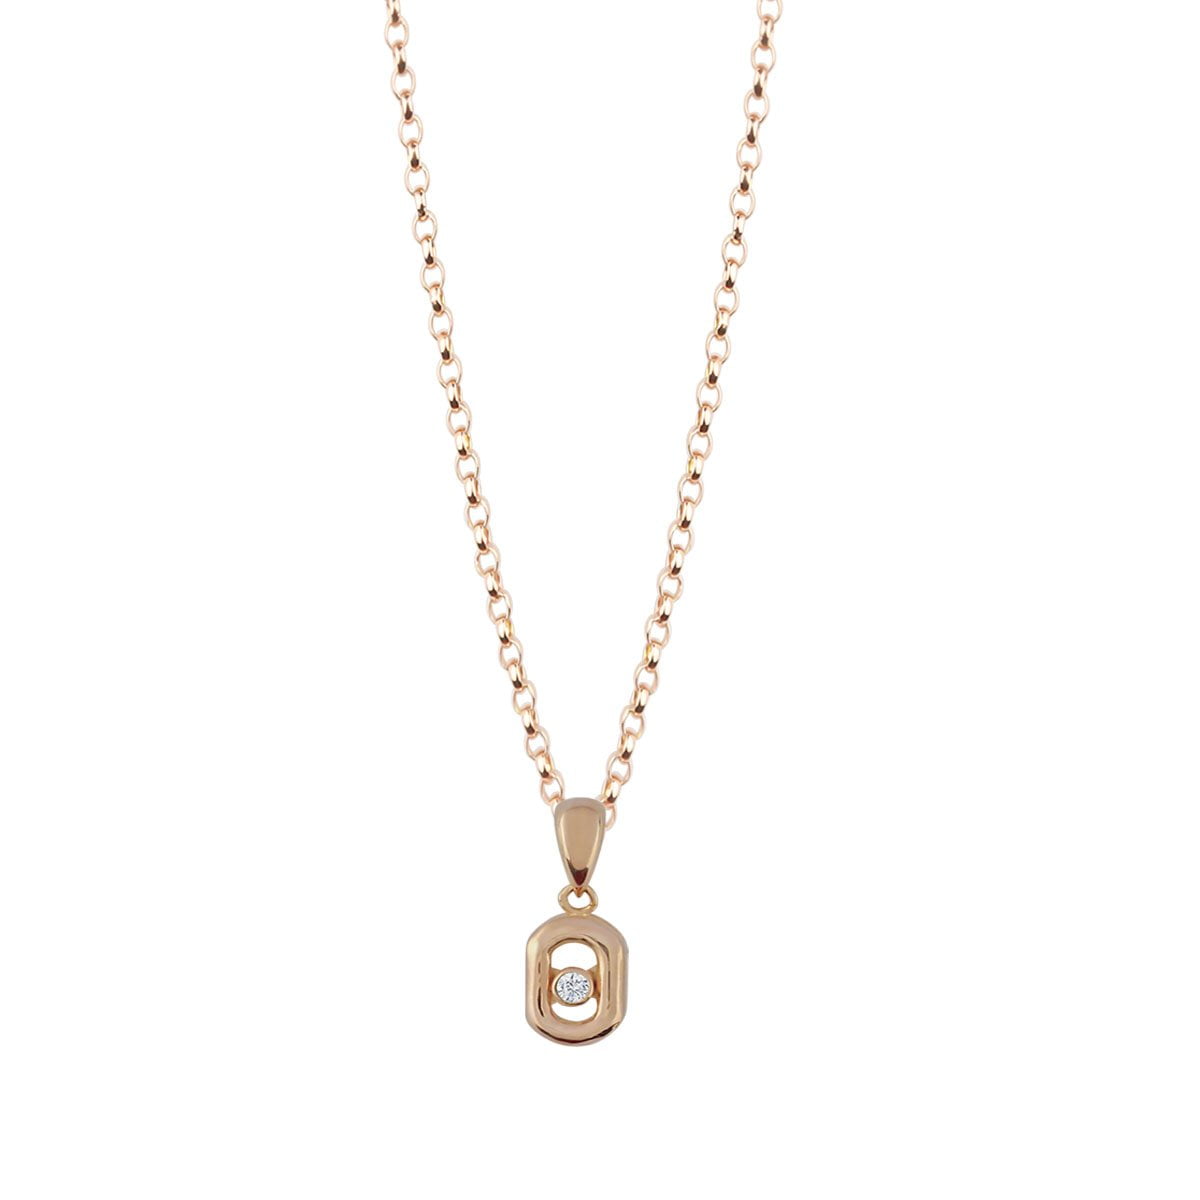 Cali Mini 18ct Rose Gold Pendant Charm With A Gold Chain